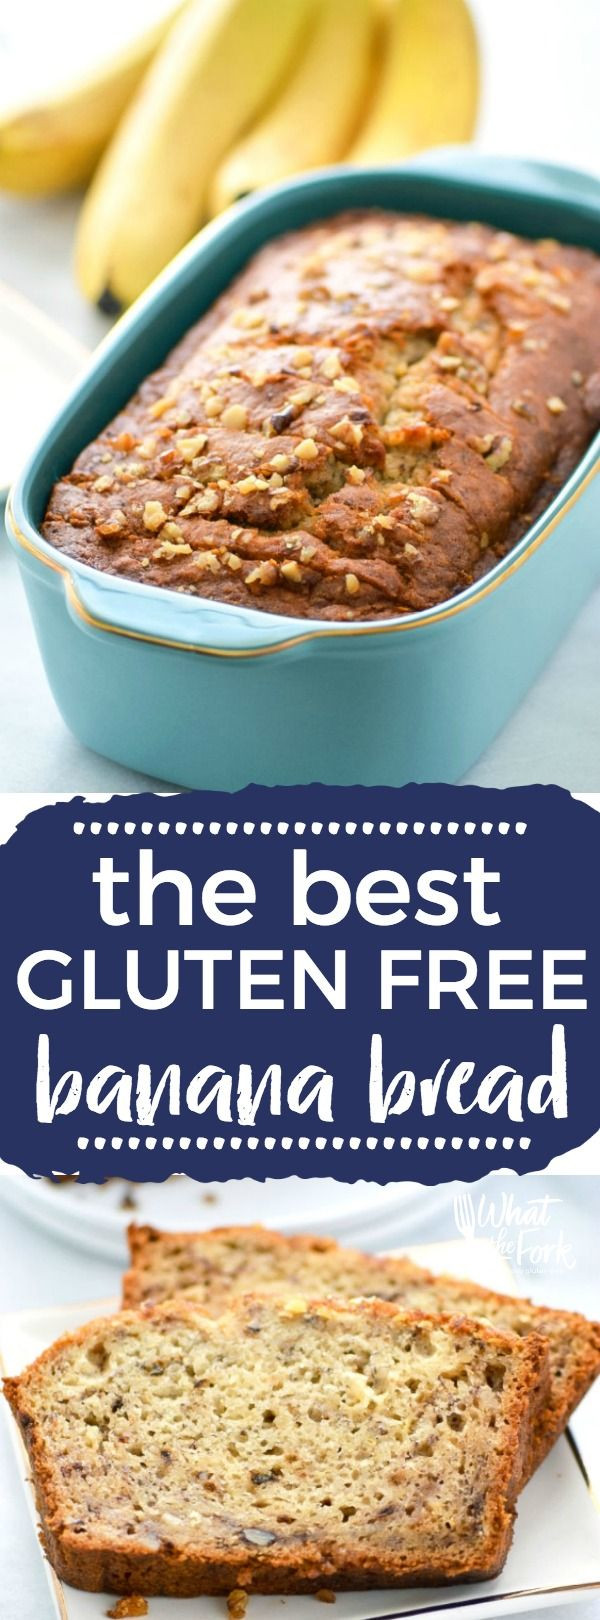 Easy Gluten And Dairy Free Recipes
 1000 ideas about Gluten Free Foods on Pinterest